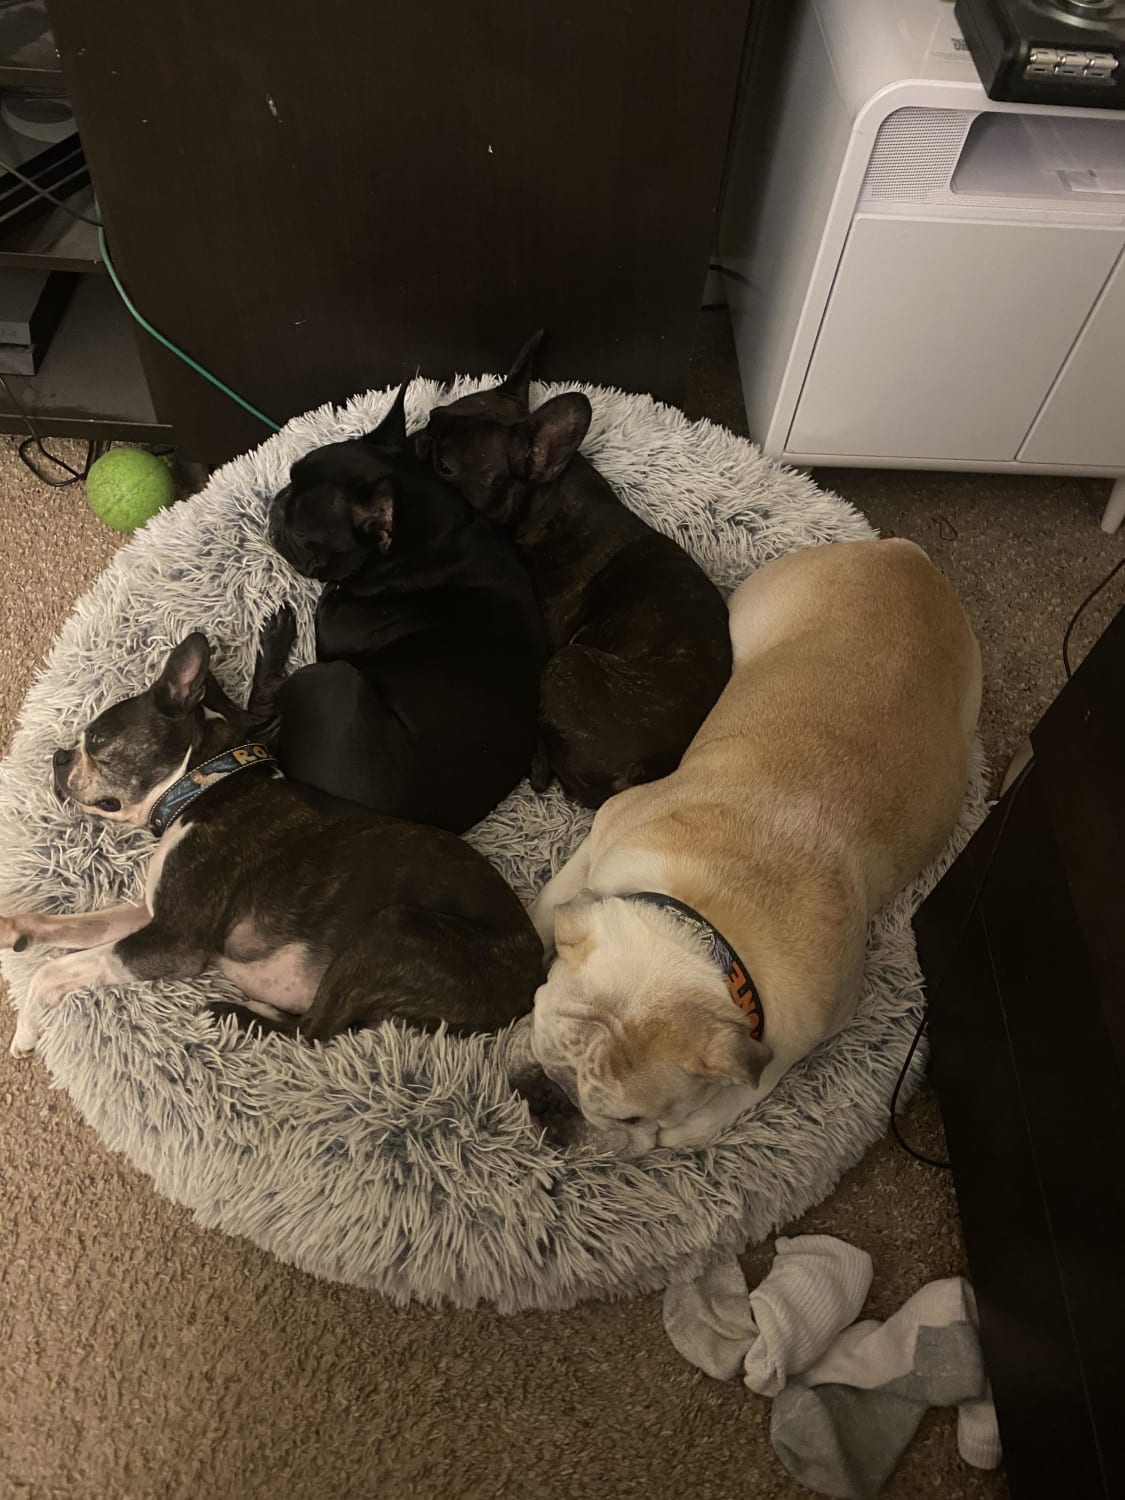 My doggies all sleeping together. It’s my smush face crew.